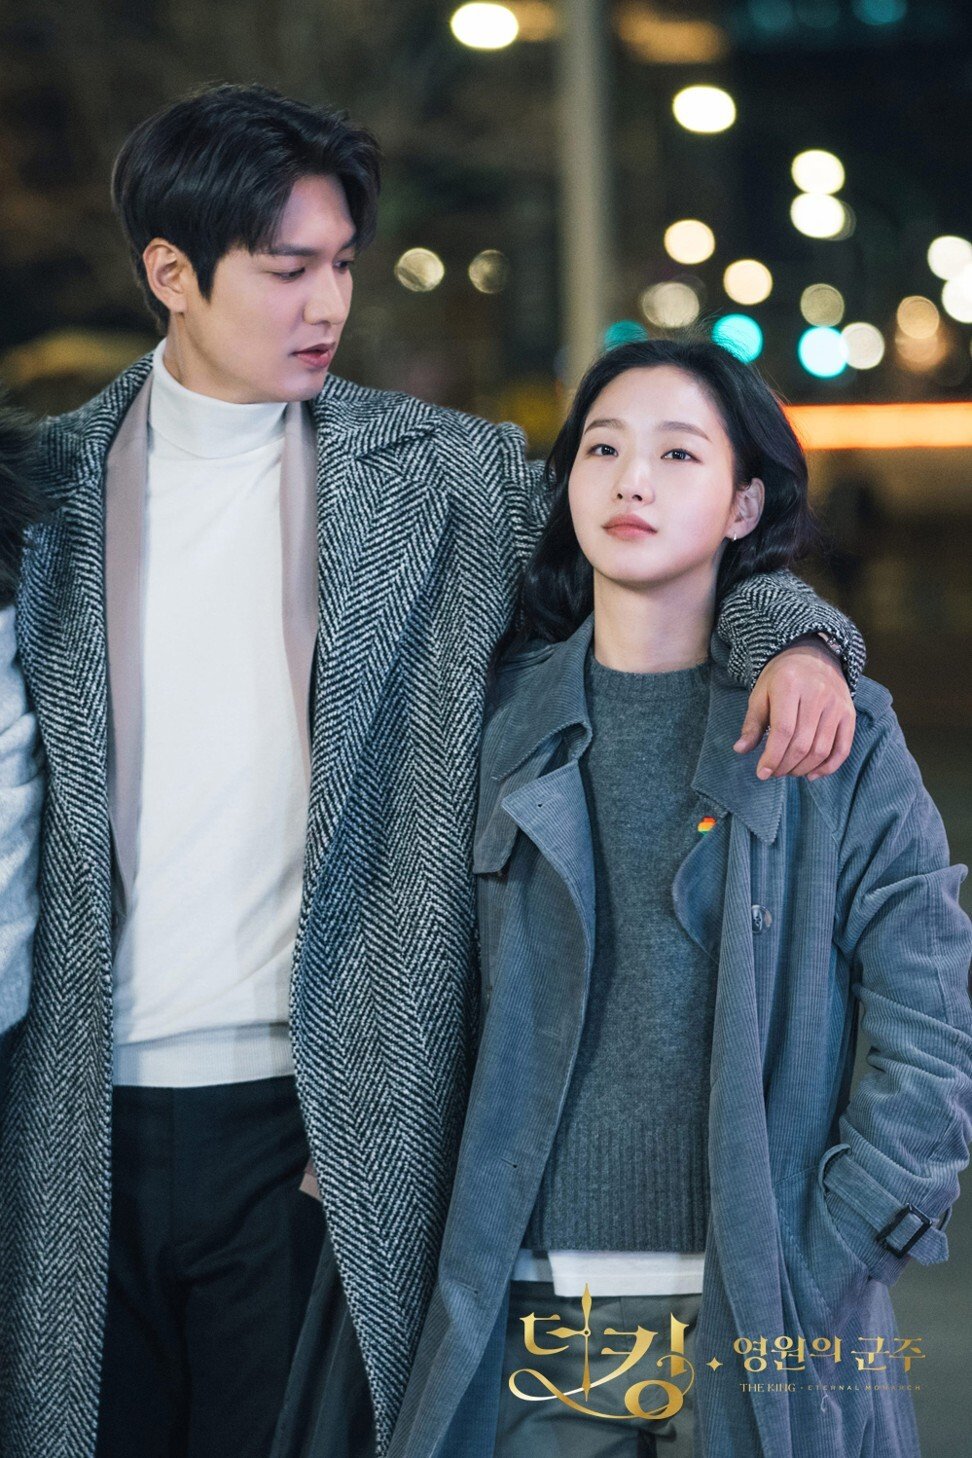 K-drama The King: Eternal Monarch tanked on Netflix but who is to blame –  stars Lee Min-ho and Kim Go-eun, or writer Kim Eun-sook?